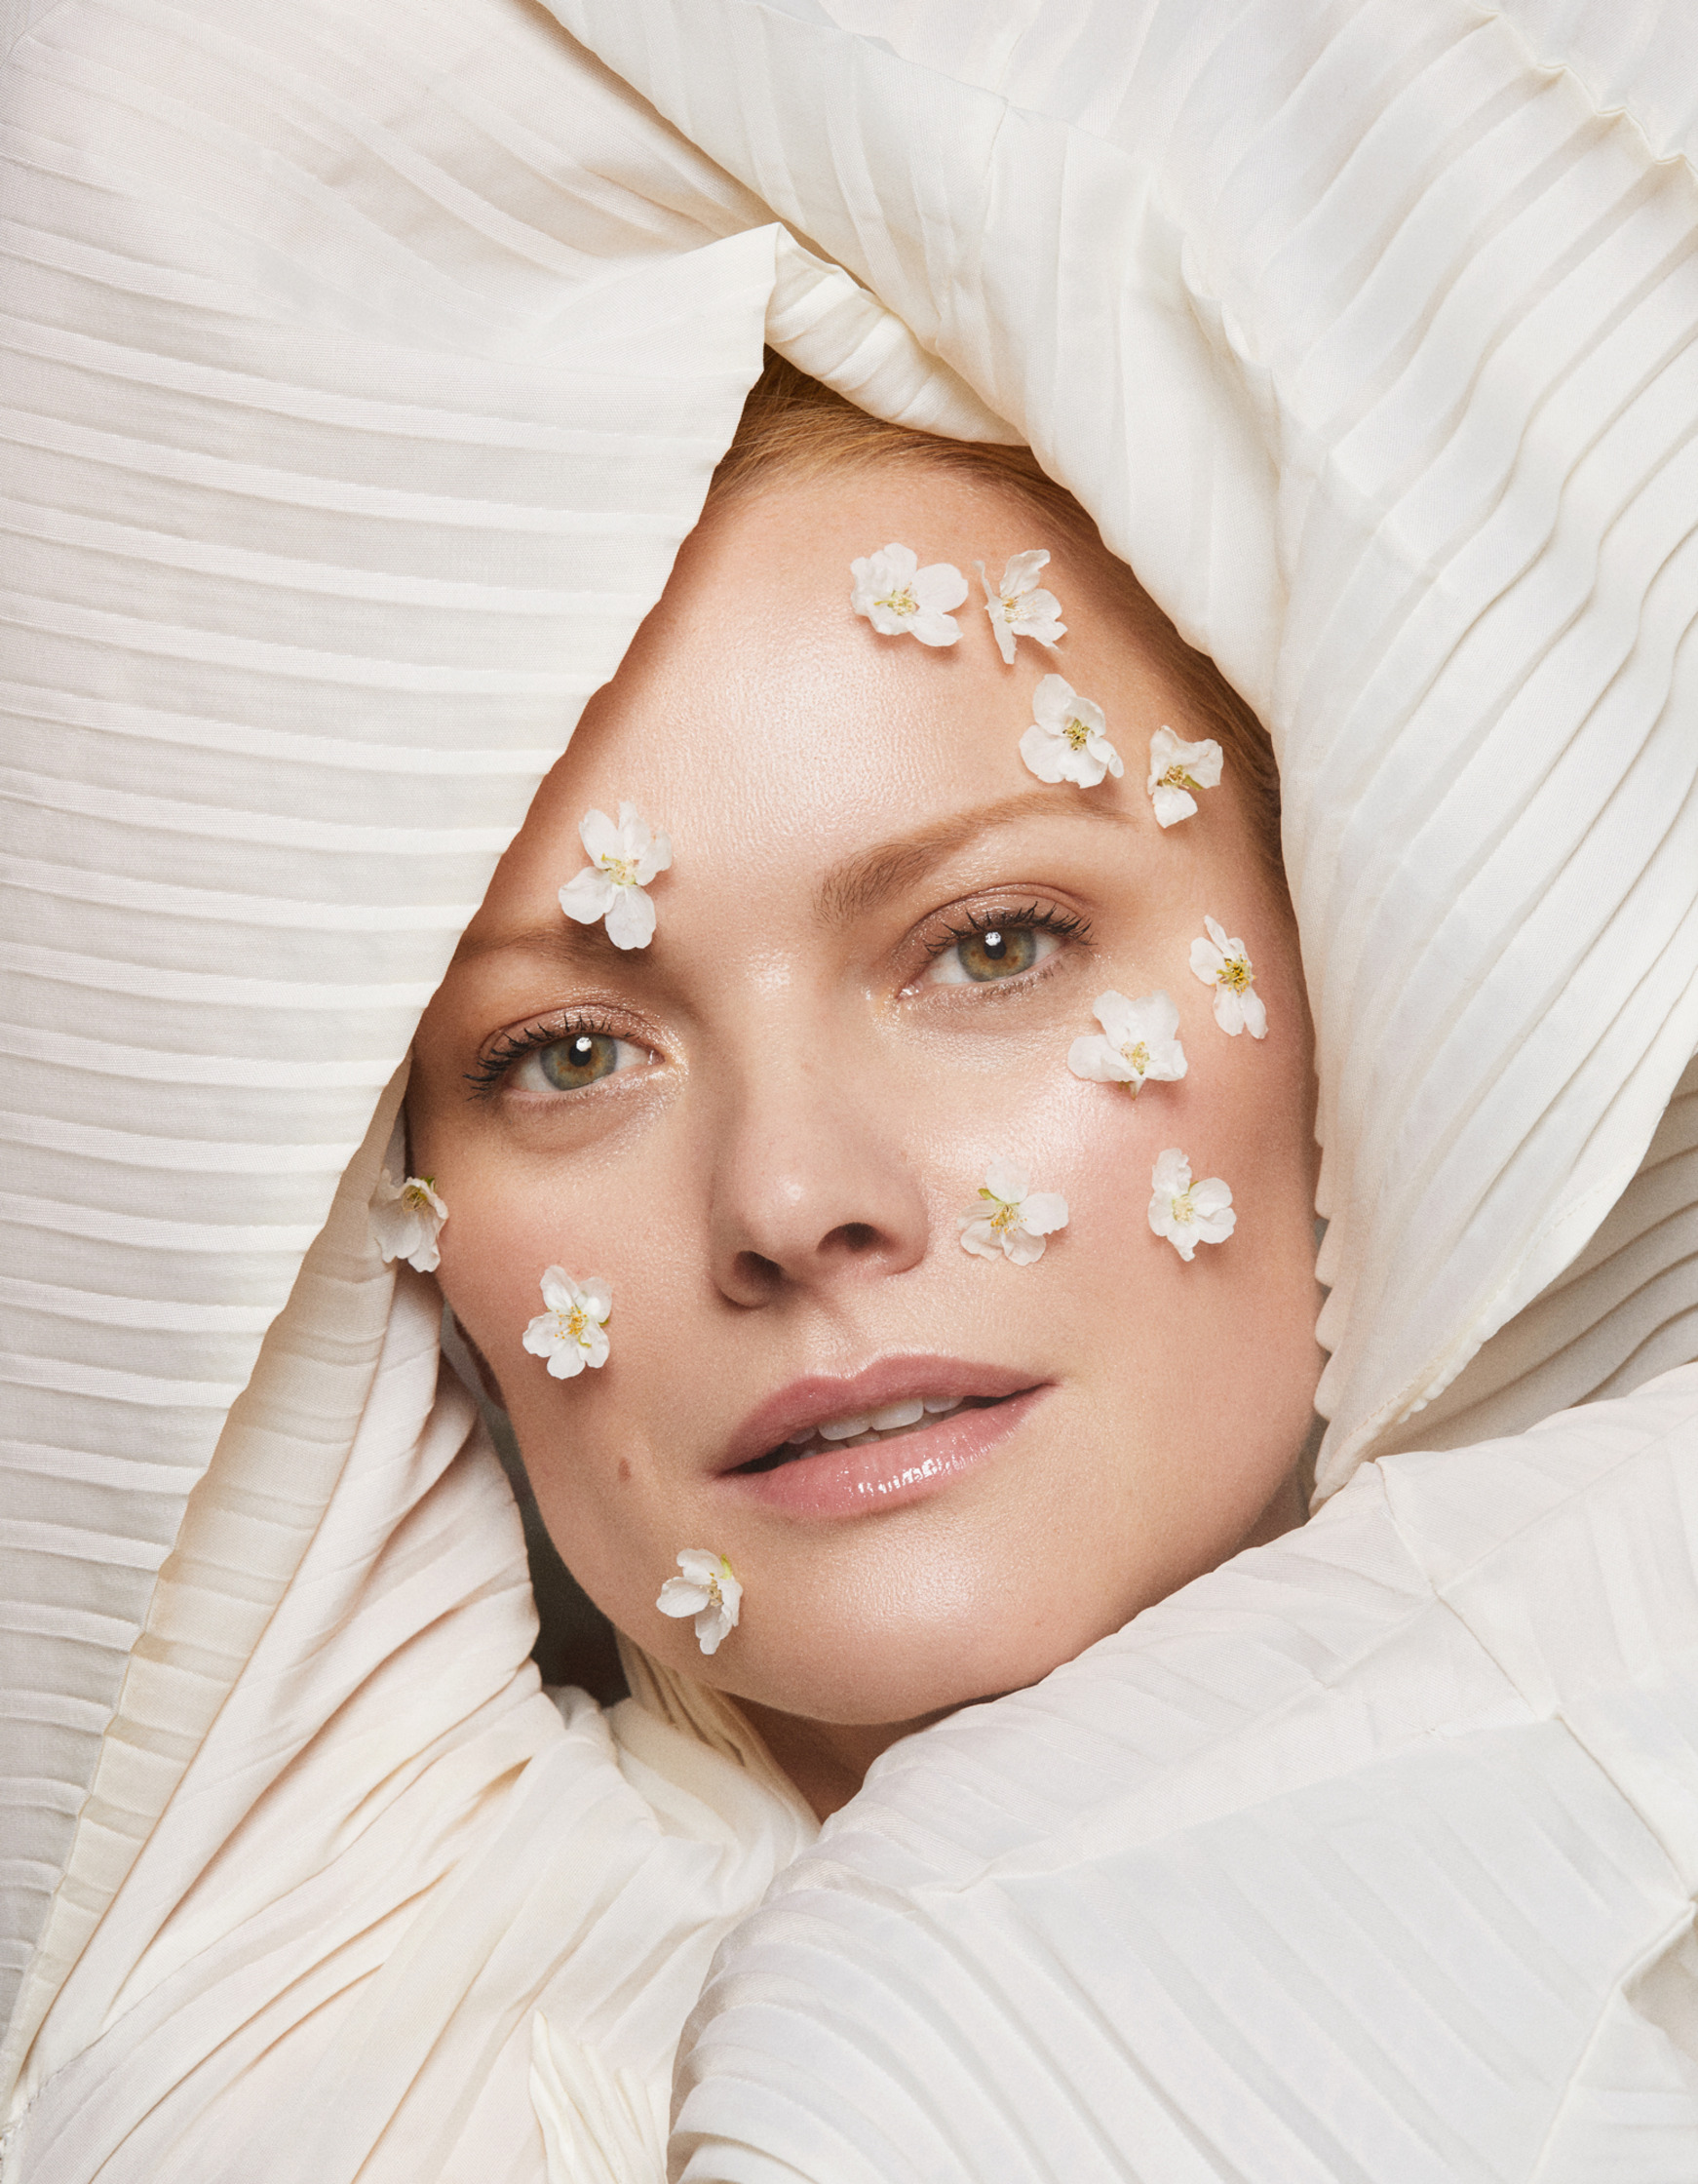 FRANZISKA KNUPPE  with white flowers on her face